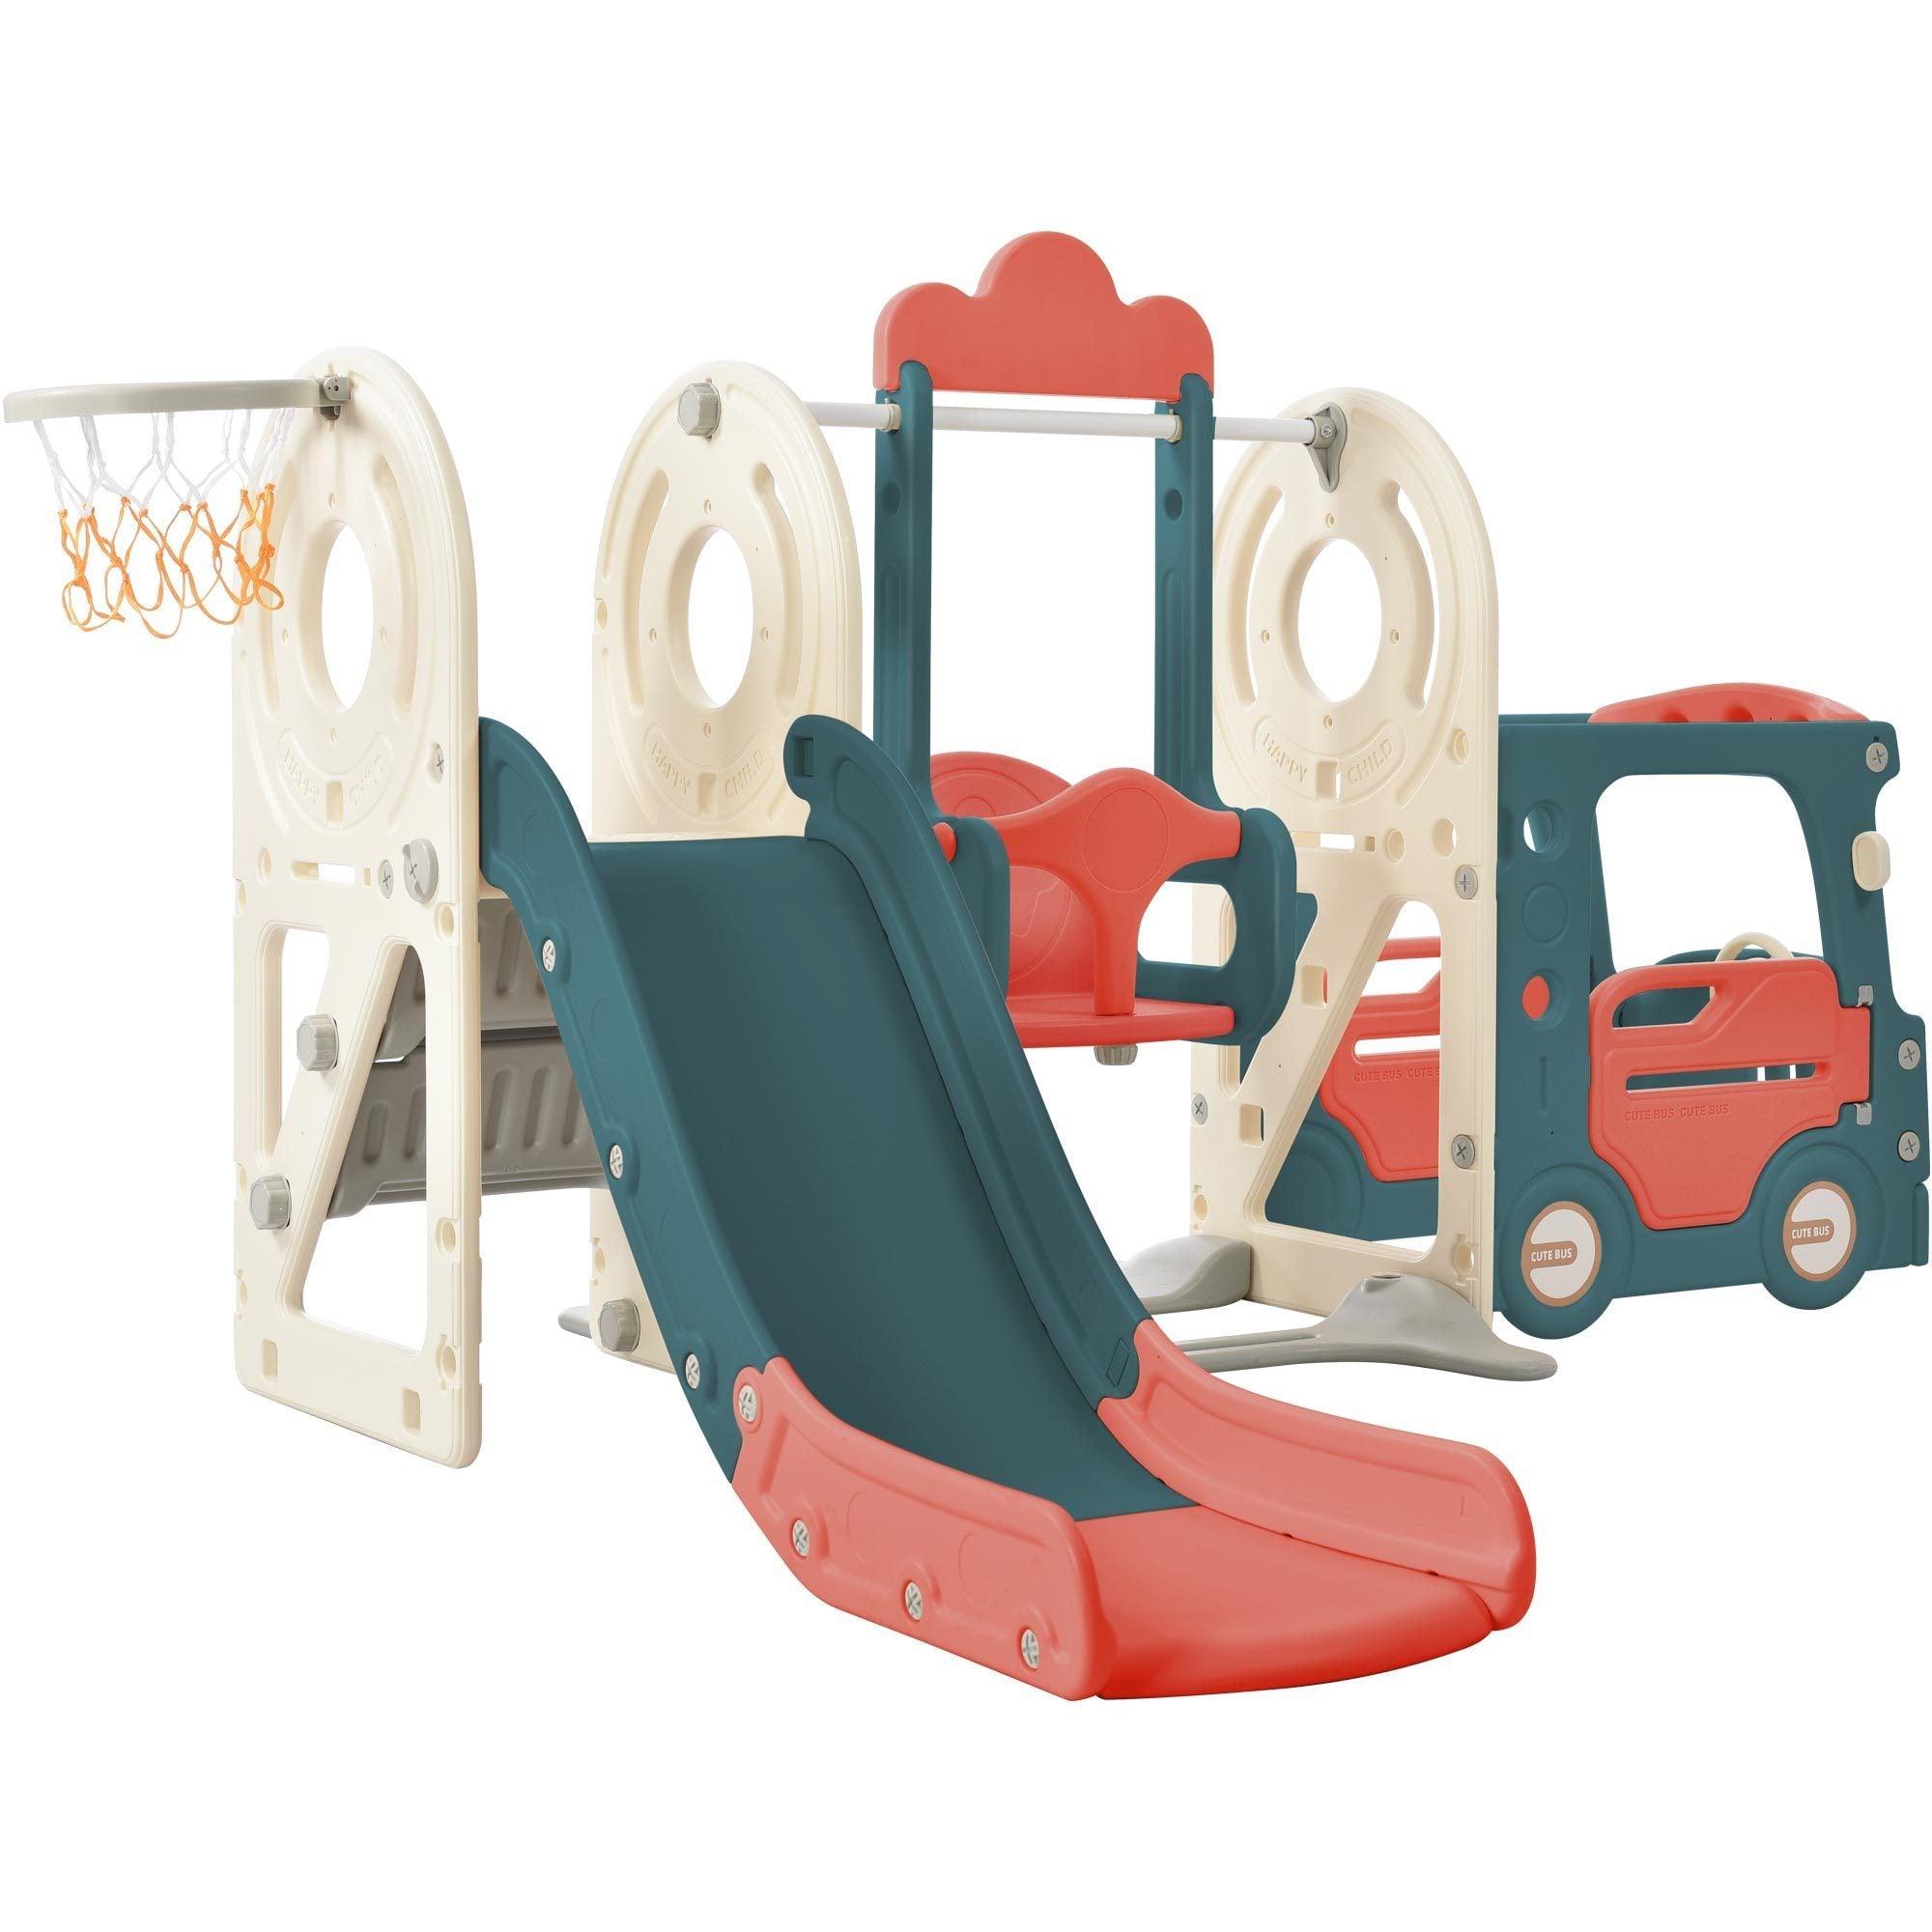 🆓🚛 Kids Swing-N-Slide With Bus Play Structure, Freestanding Bus Toy With Slide&Swing for Toddlers, Bus Slide Set With Basketball Hoop, Red & Blue